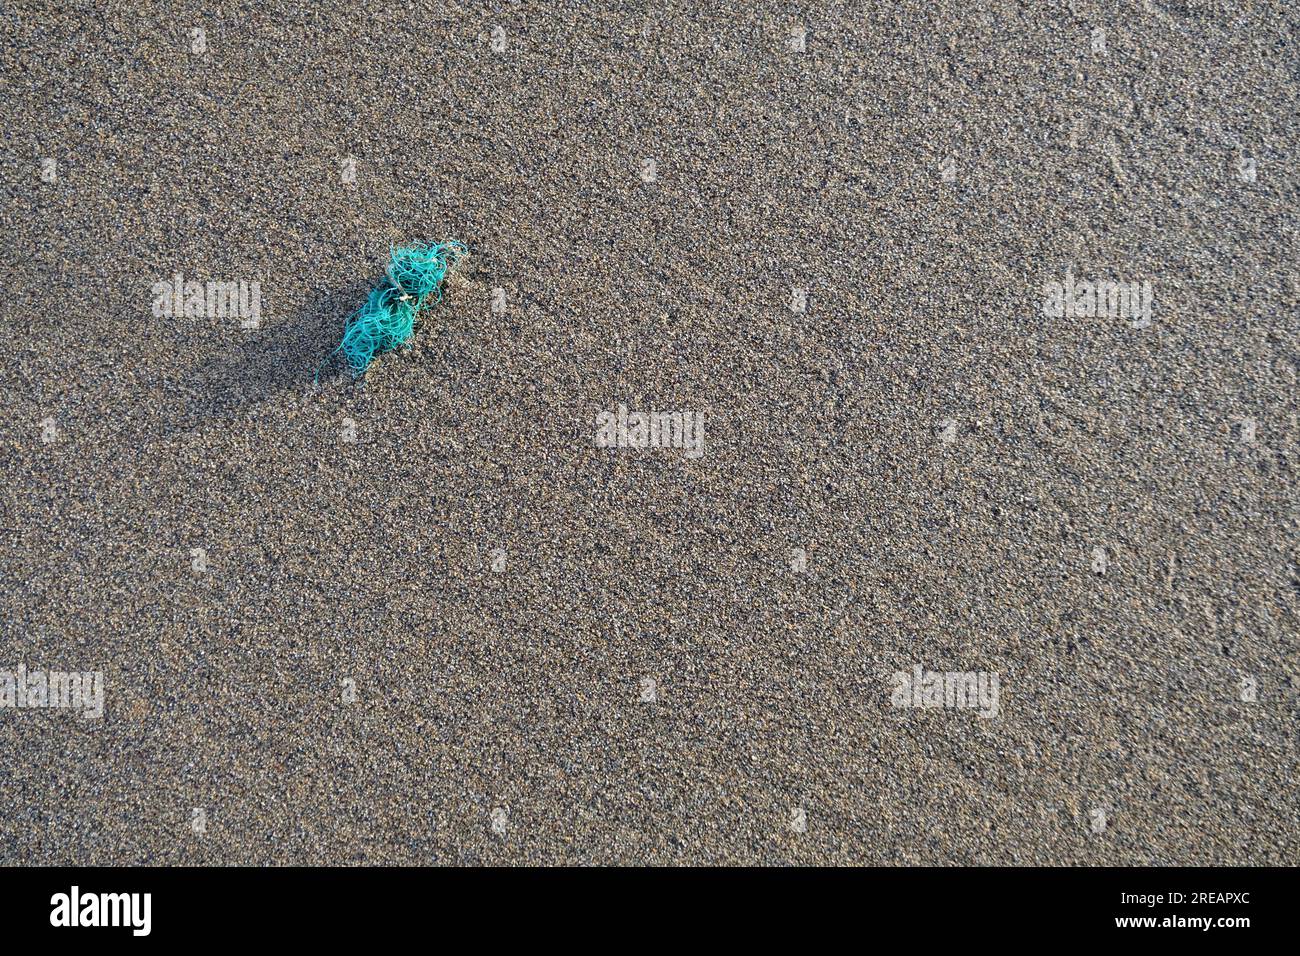 A small piece of plastic on a beach. Shoreside pollution concept. Stock Photo